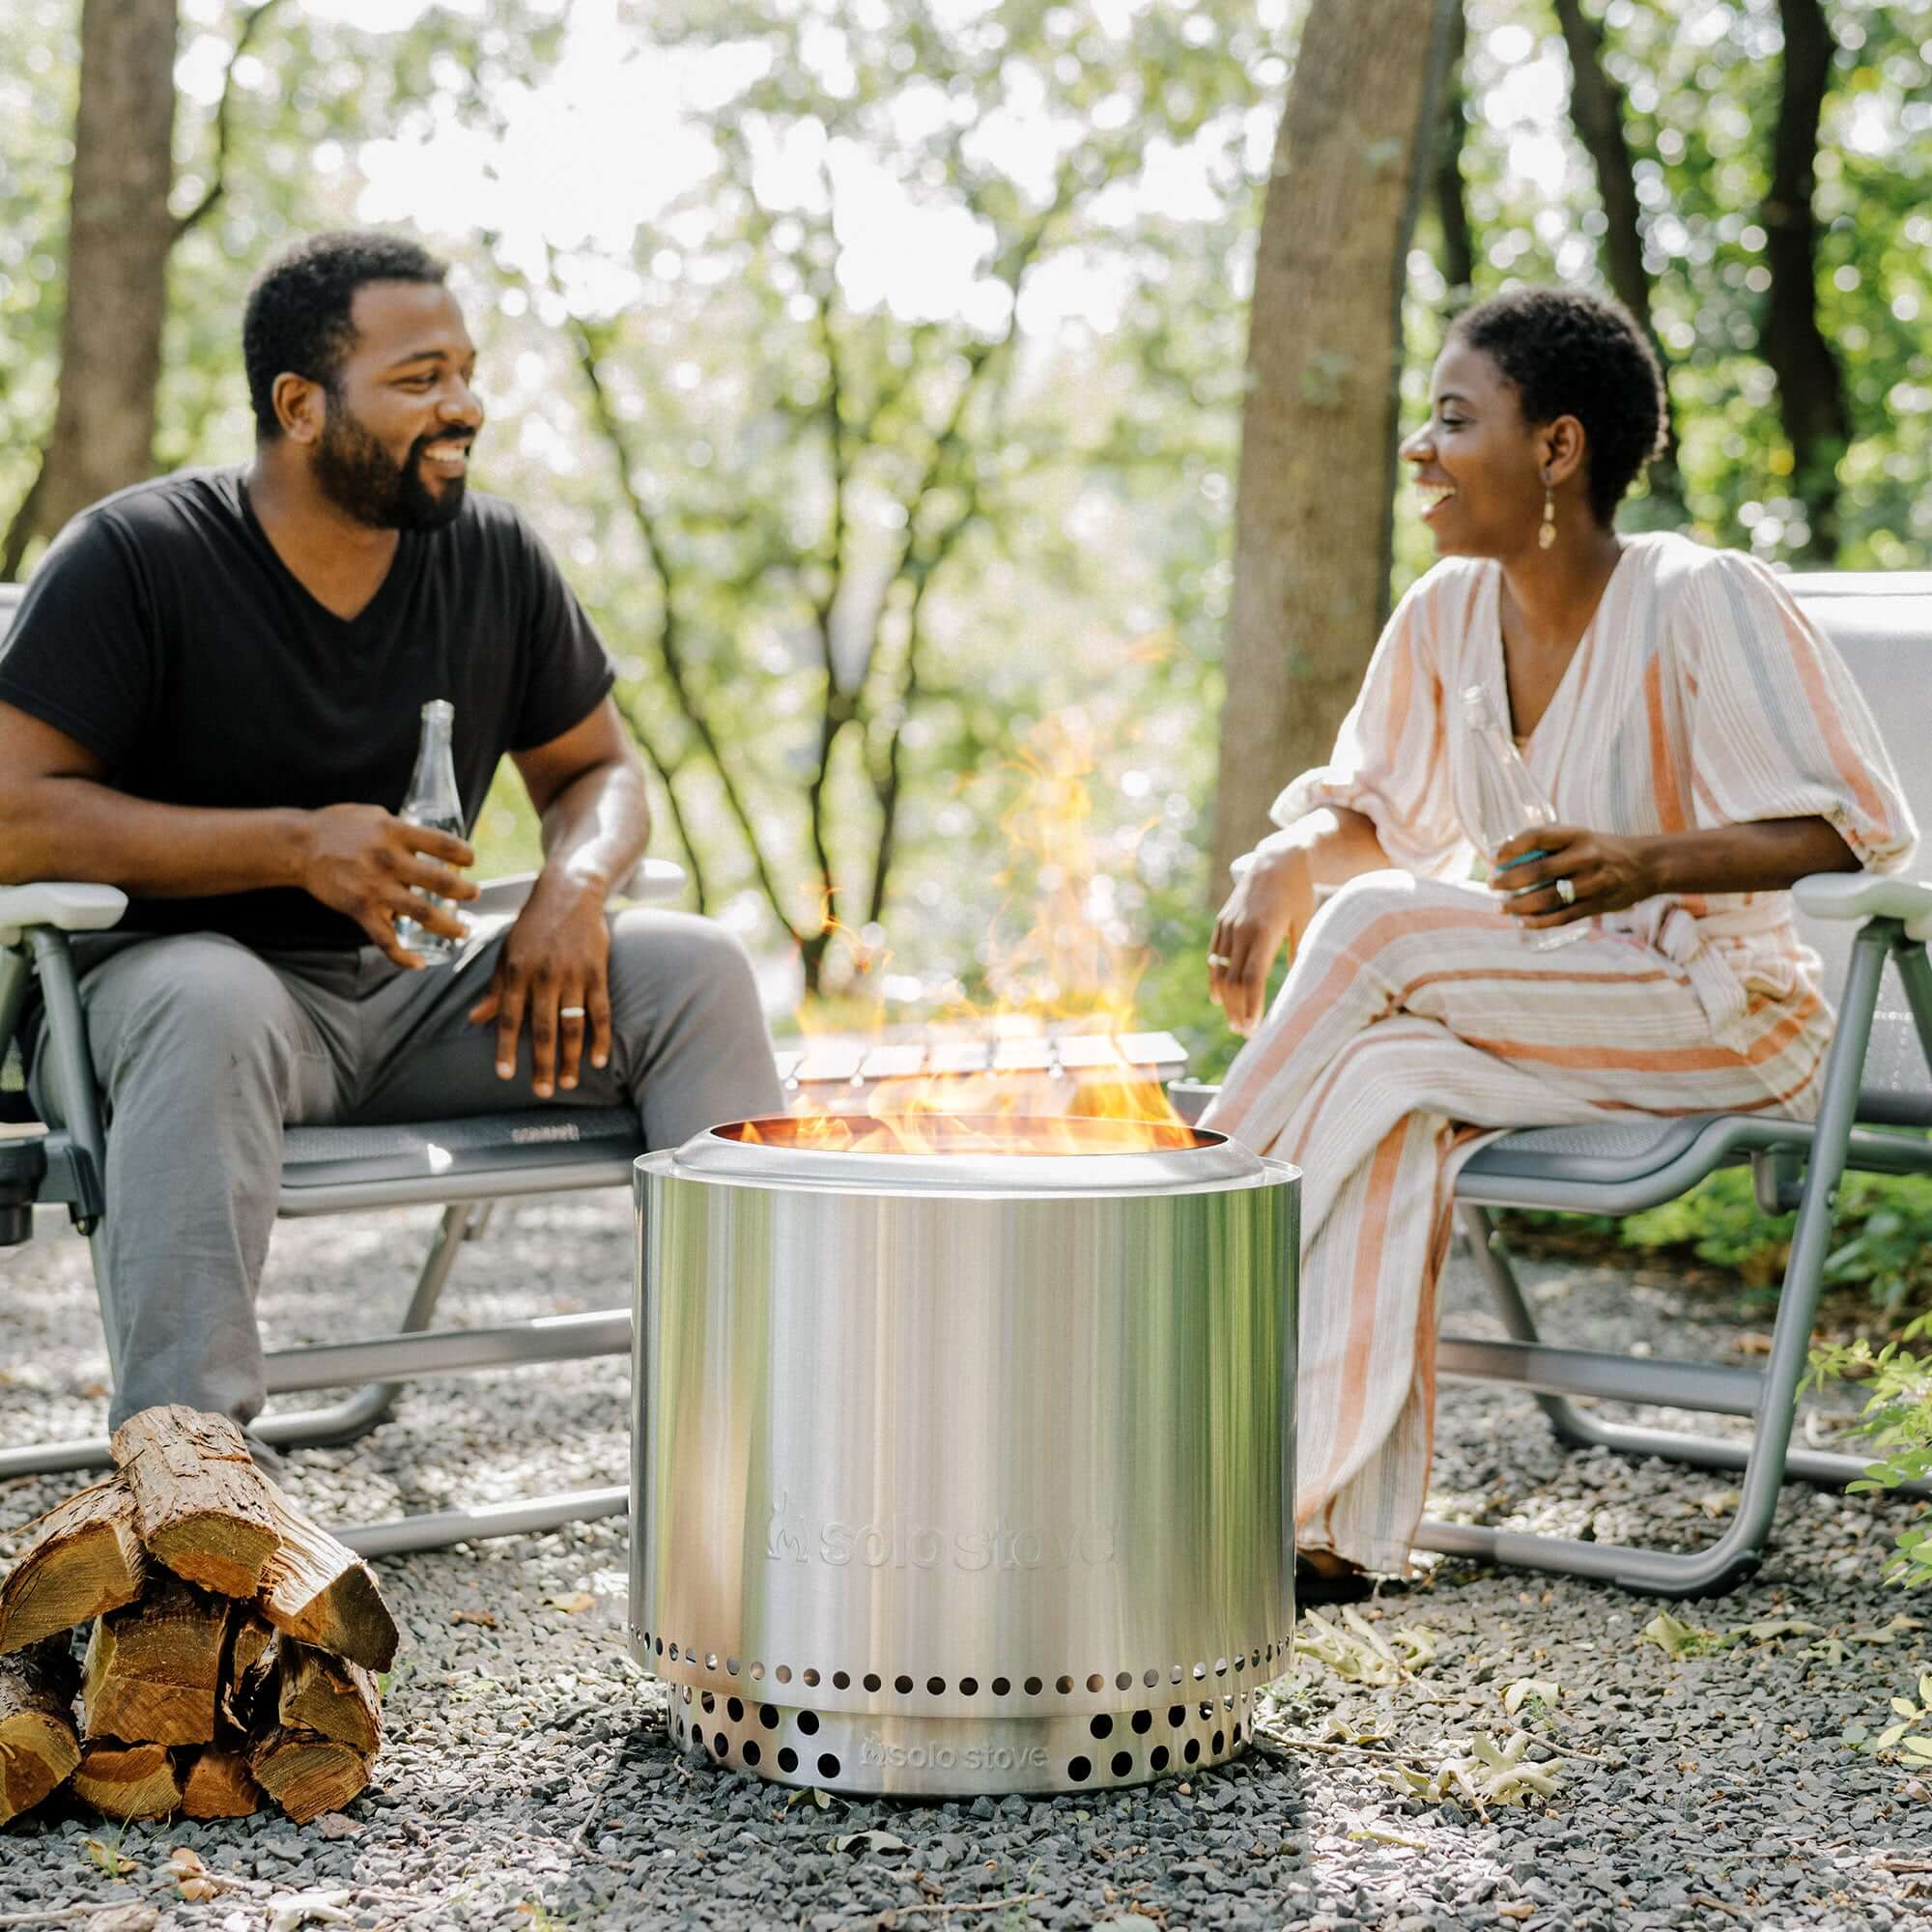 Man and woman sitting next to the Solo stove bonfire fire pit